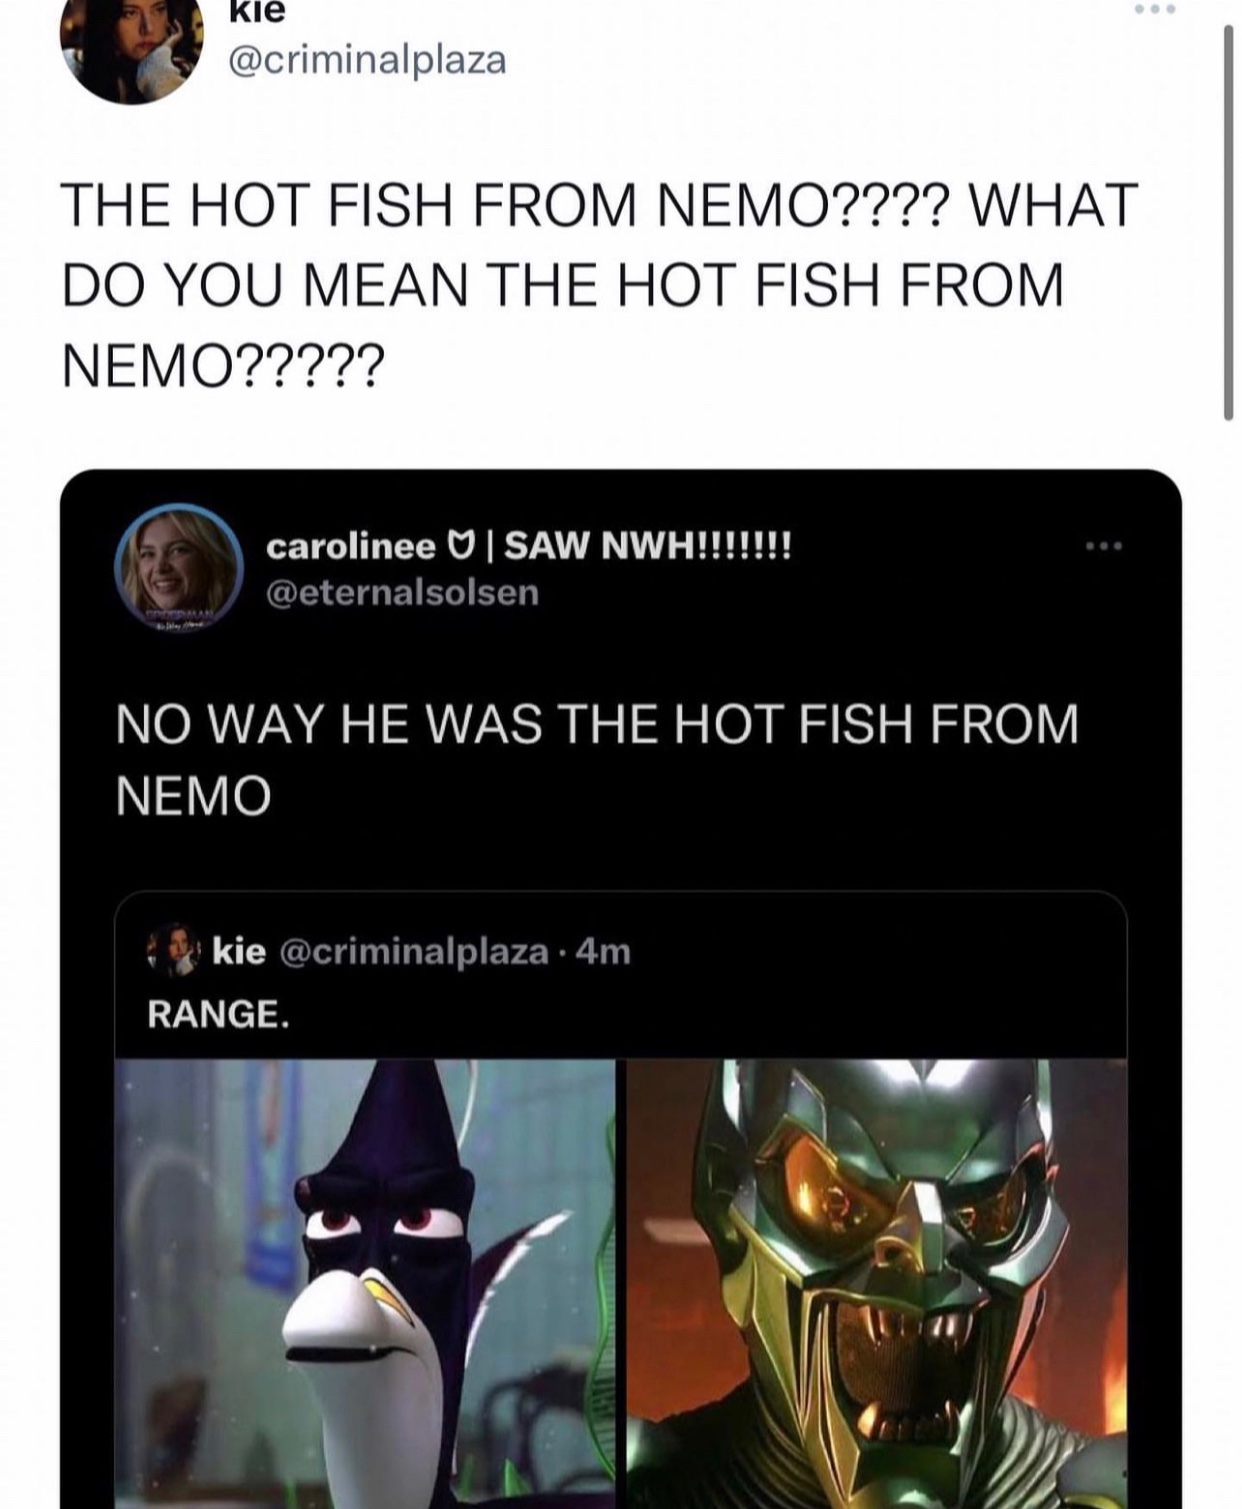 the internet hall of shame - green goblin - kie The Hot Fish From Nemo???? What Do You Mean The Hot Fish From Nemo????? carolinee | Saw Nwh!!!!!!! No Way He Was The Hot Fish From Nemo kie . 4m Range.